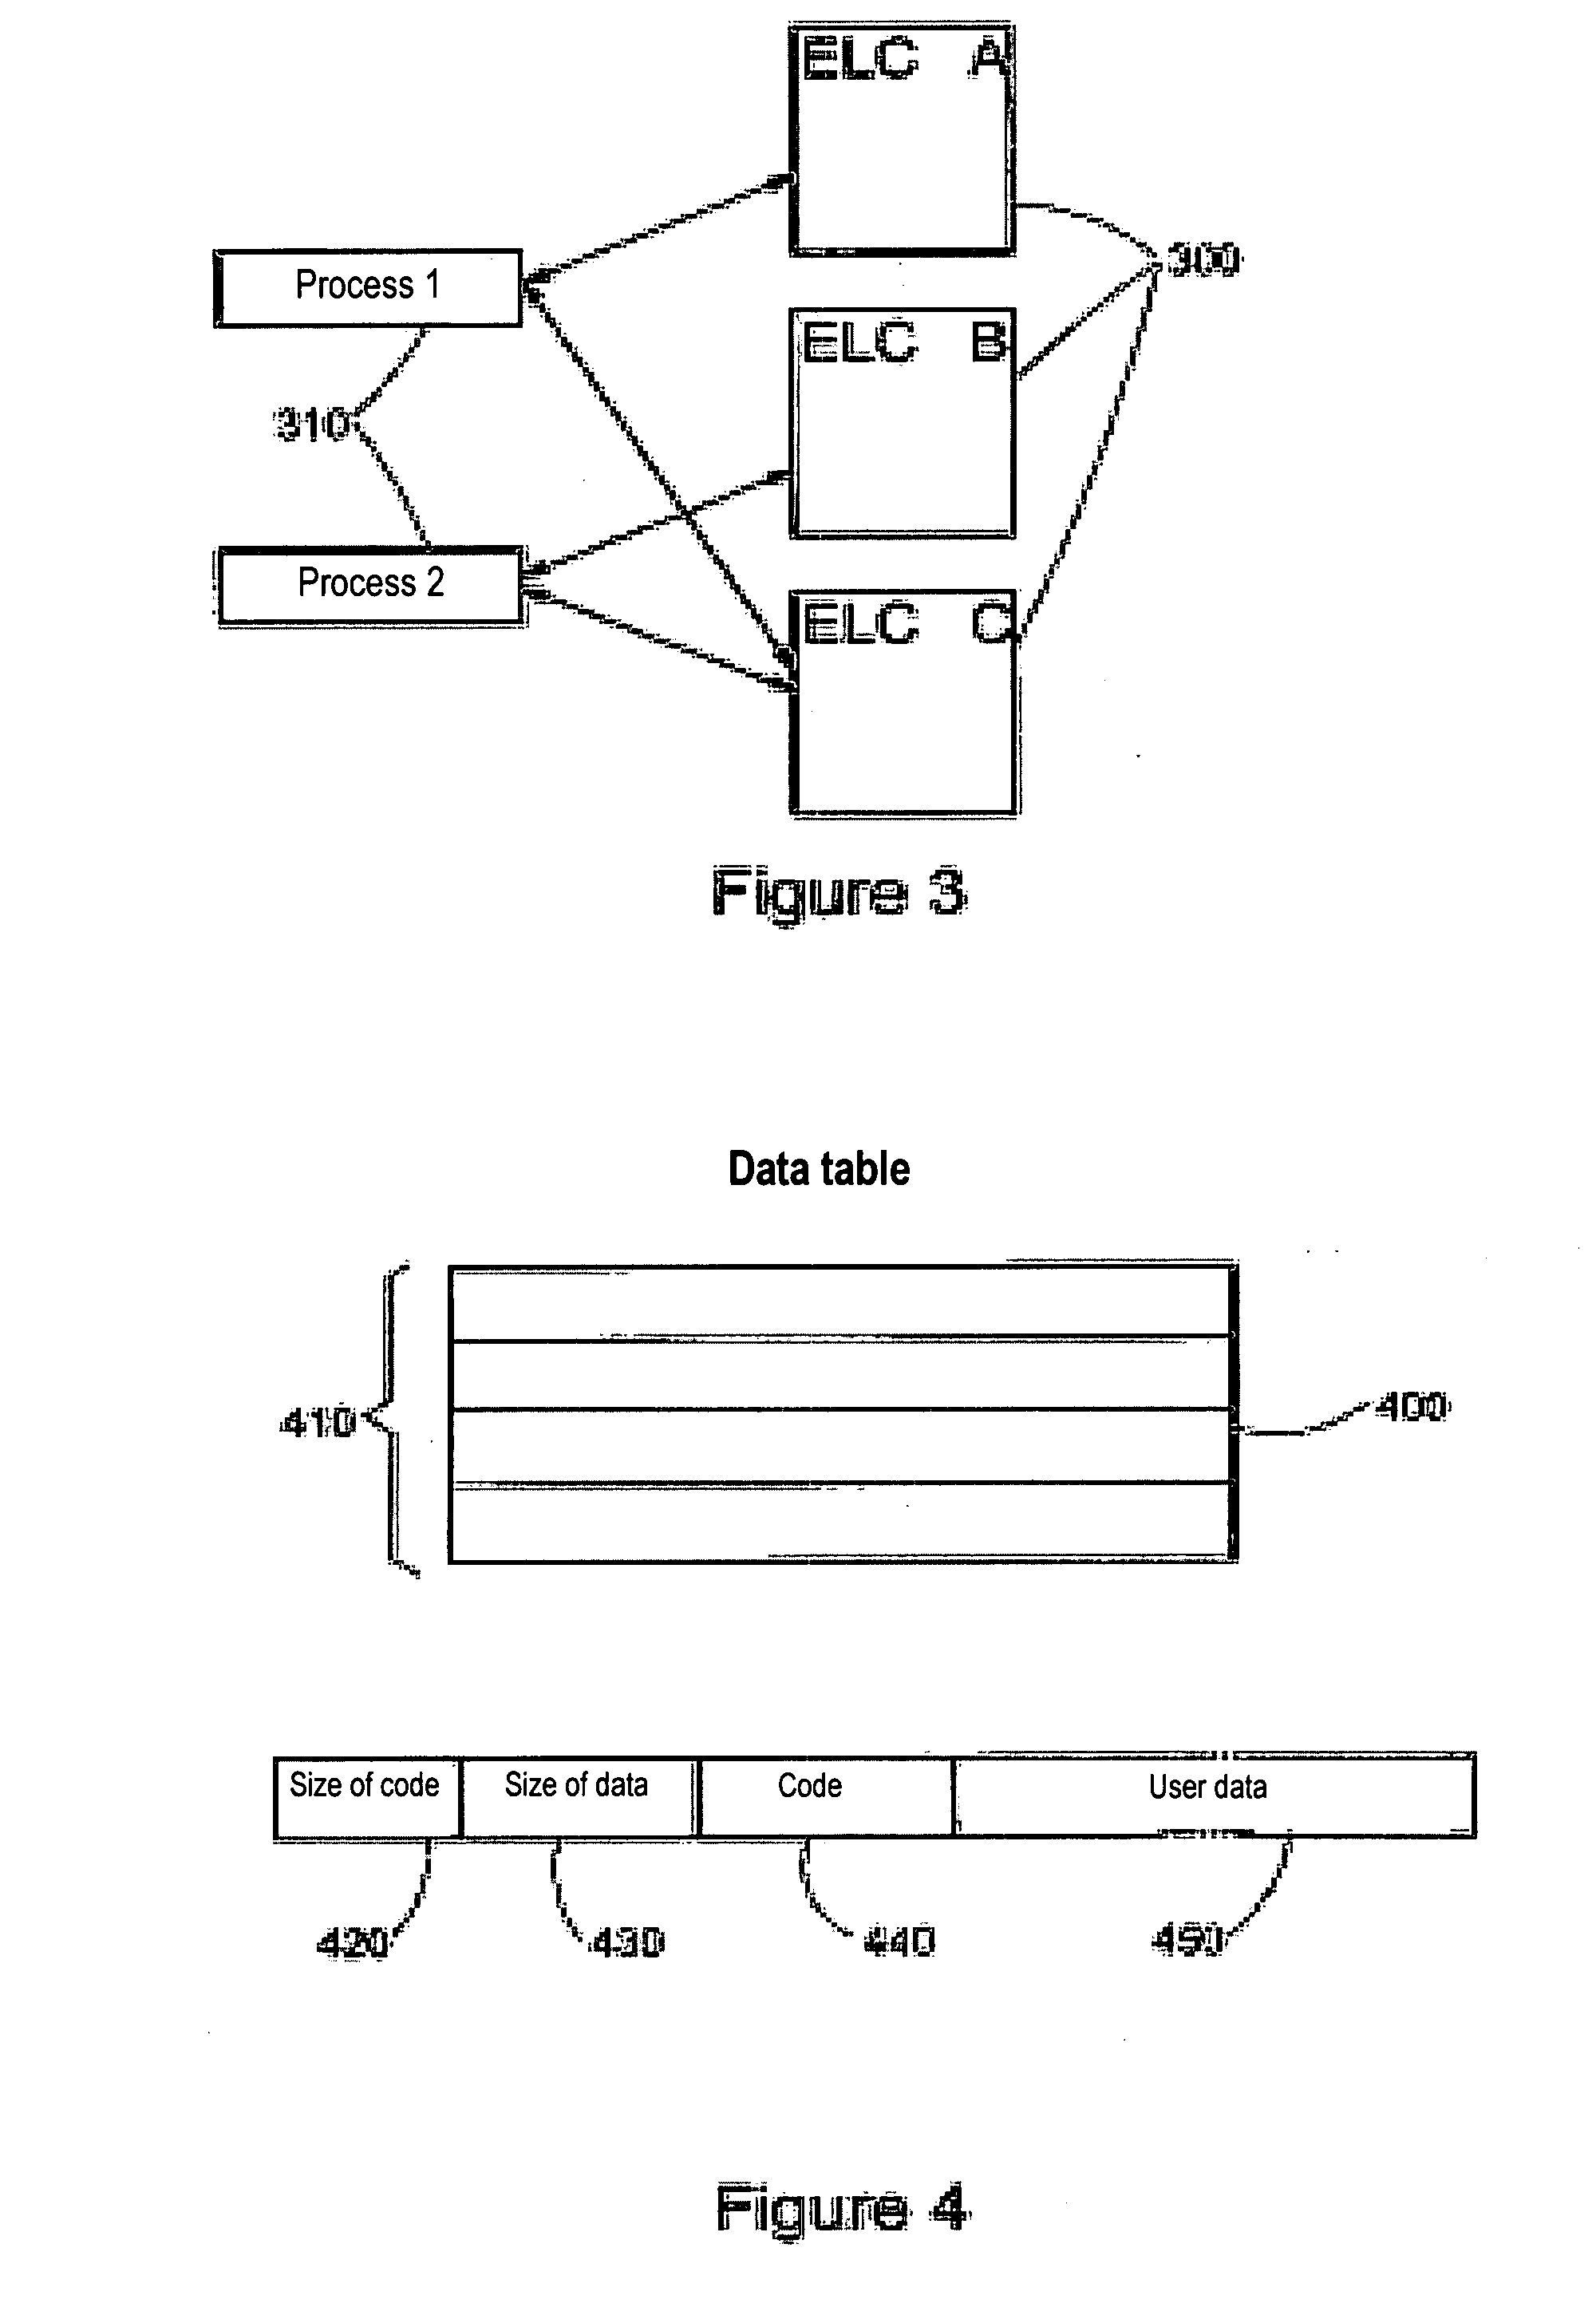 Method and System For Maintaining Consistency of a Cache Memory Accessible by Multiple Independent Processes